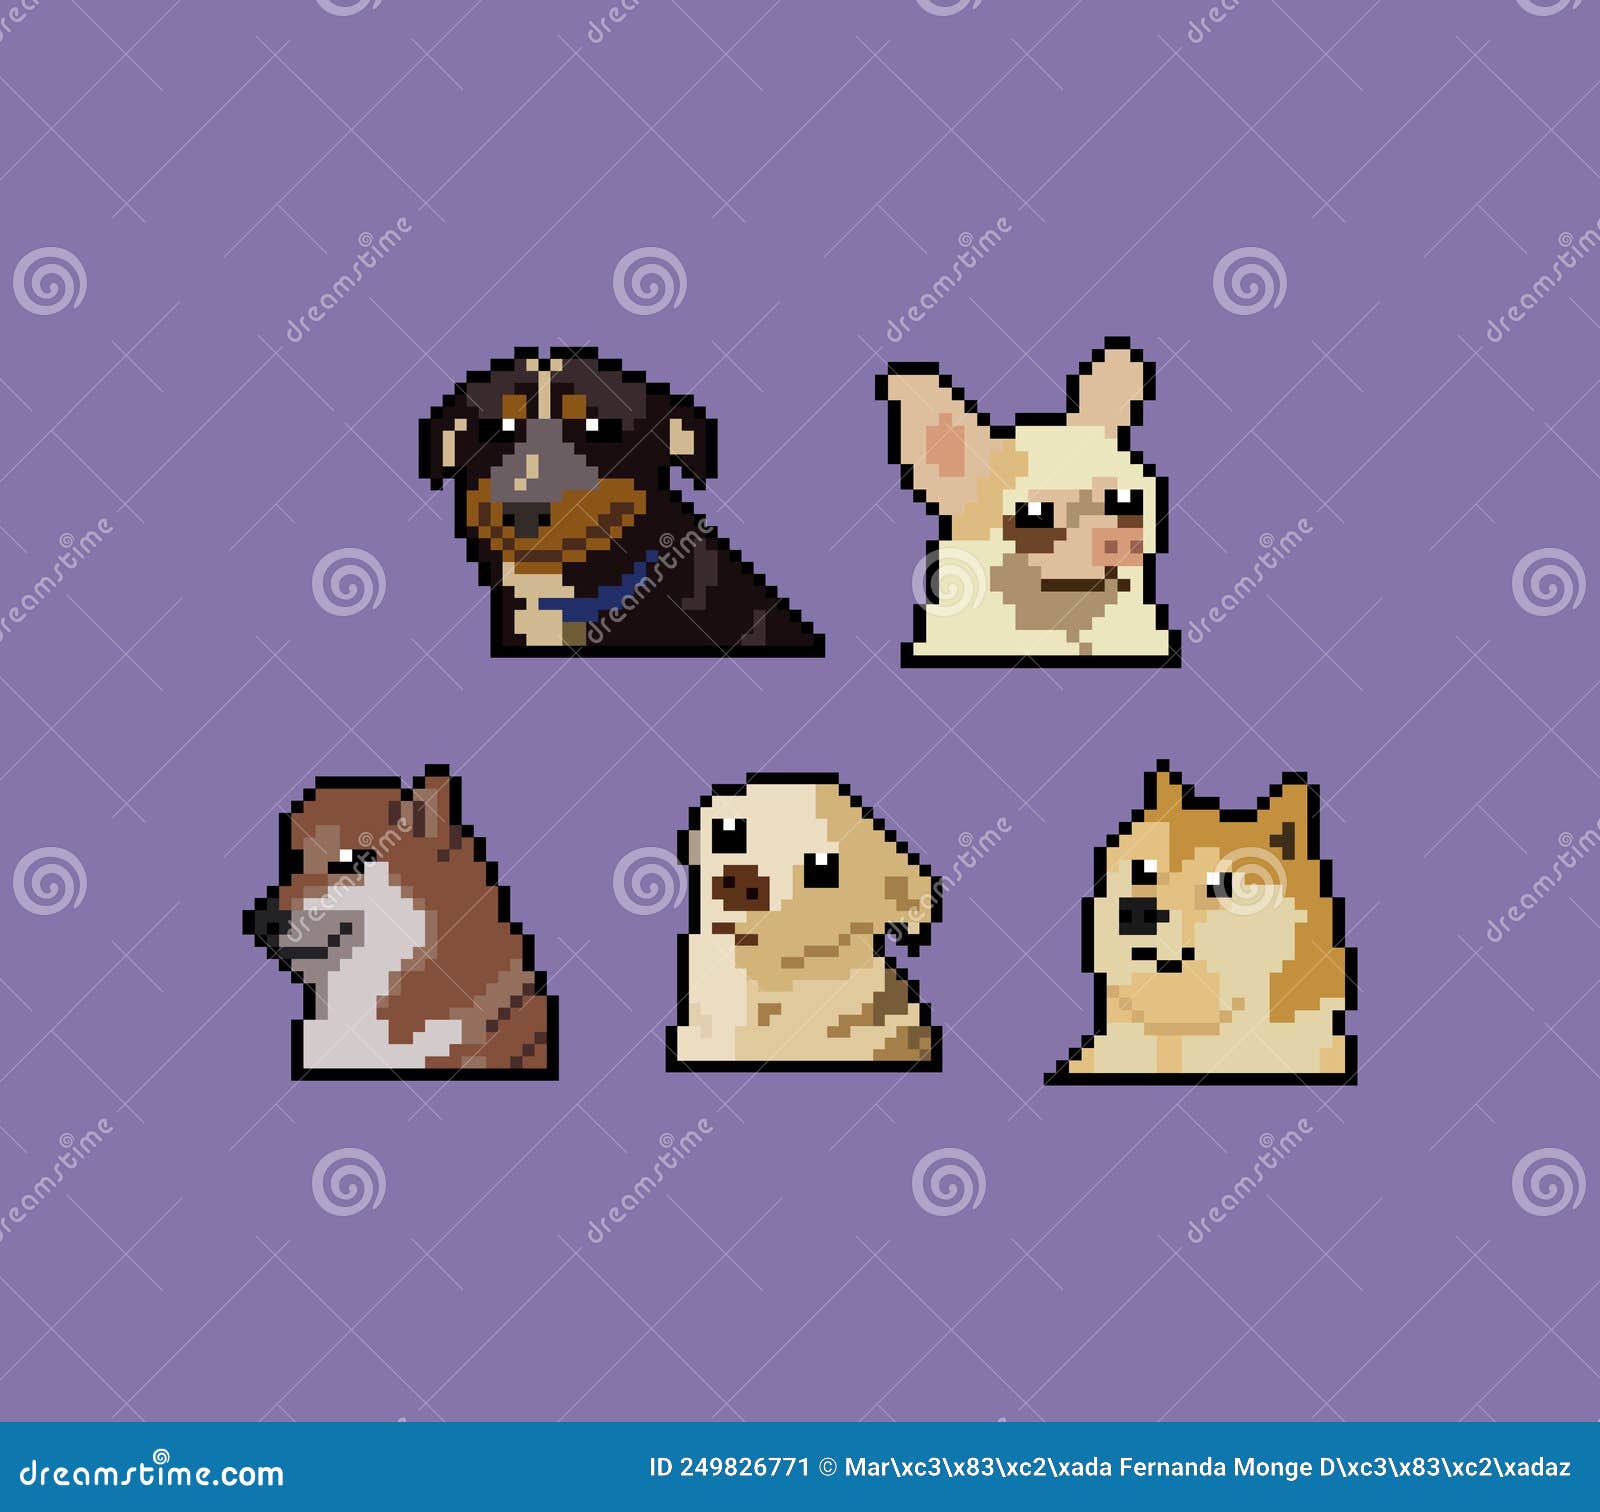 animal pixel art - pictures, memes and posts on JoyReactor